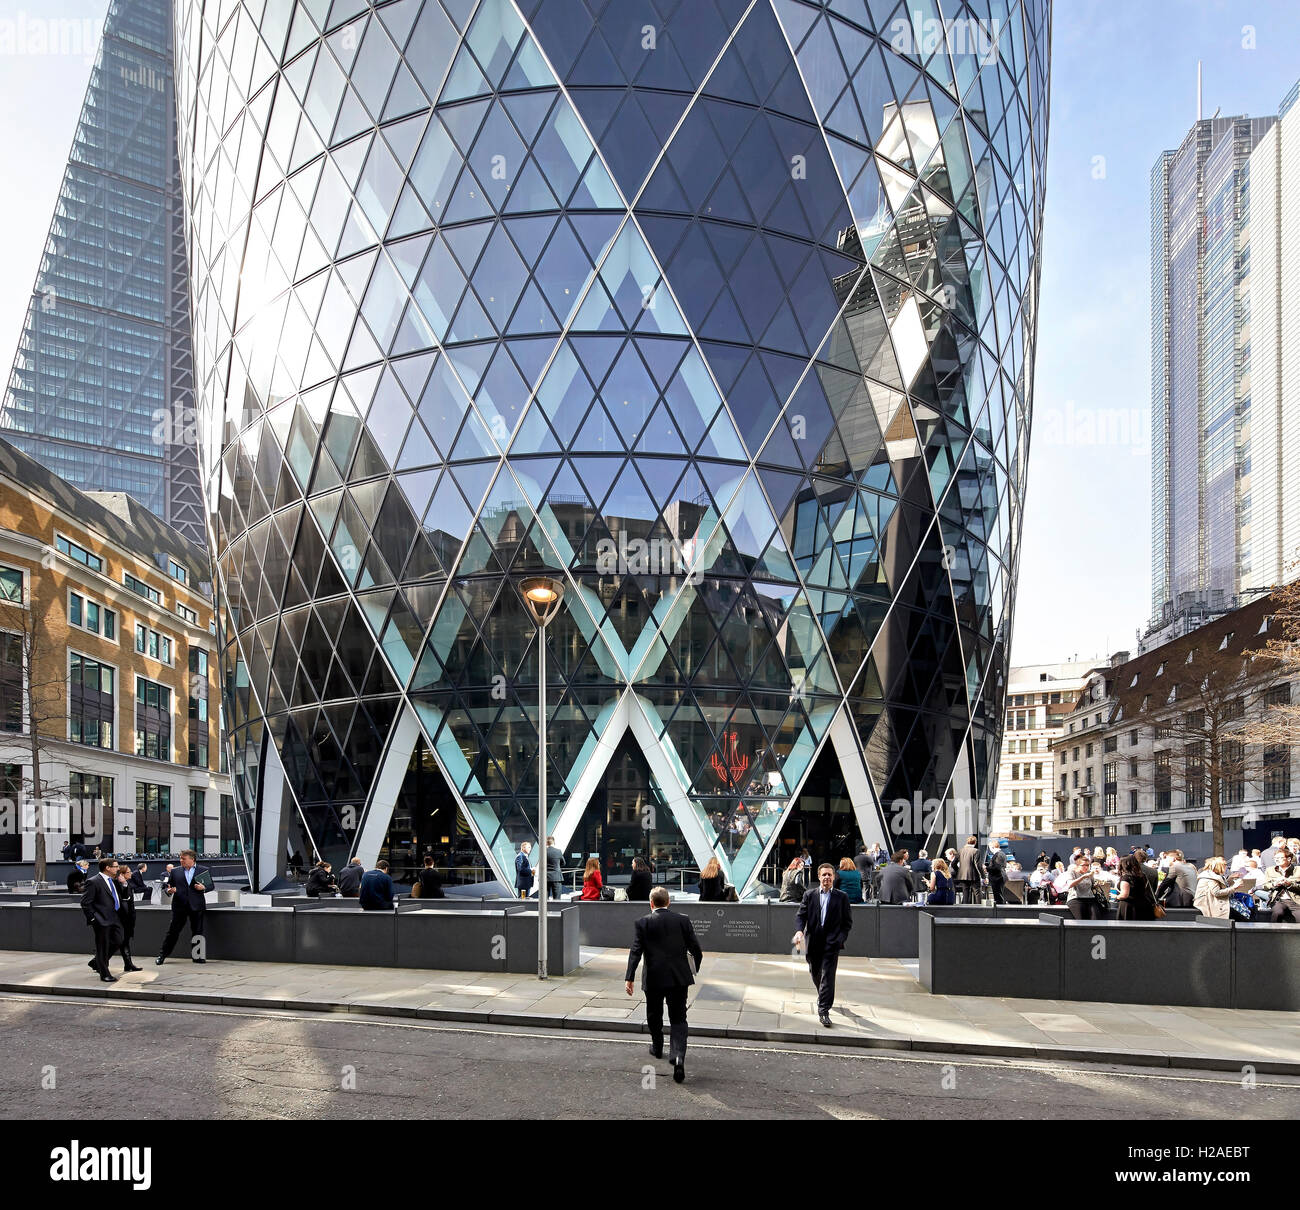 Base of building and context. The Gherkin, London, United Kingdom. Architect: Foster + Partners, 2004. Stock Photo